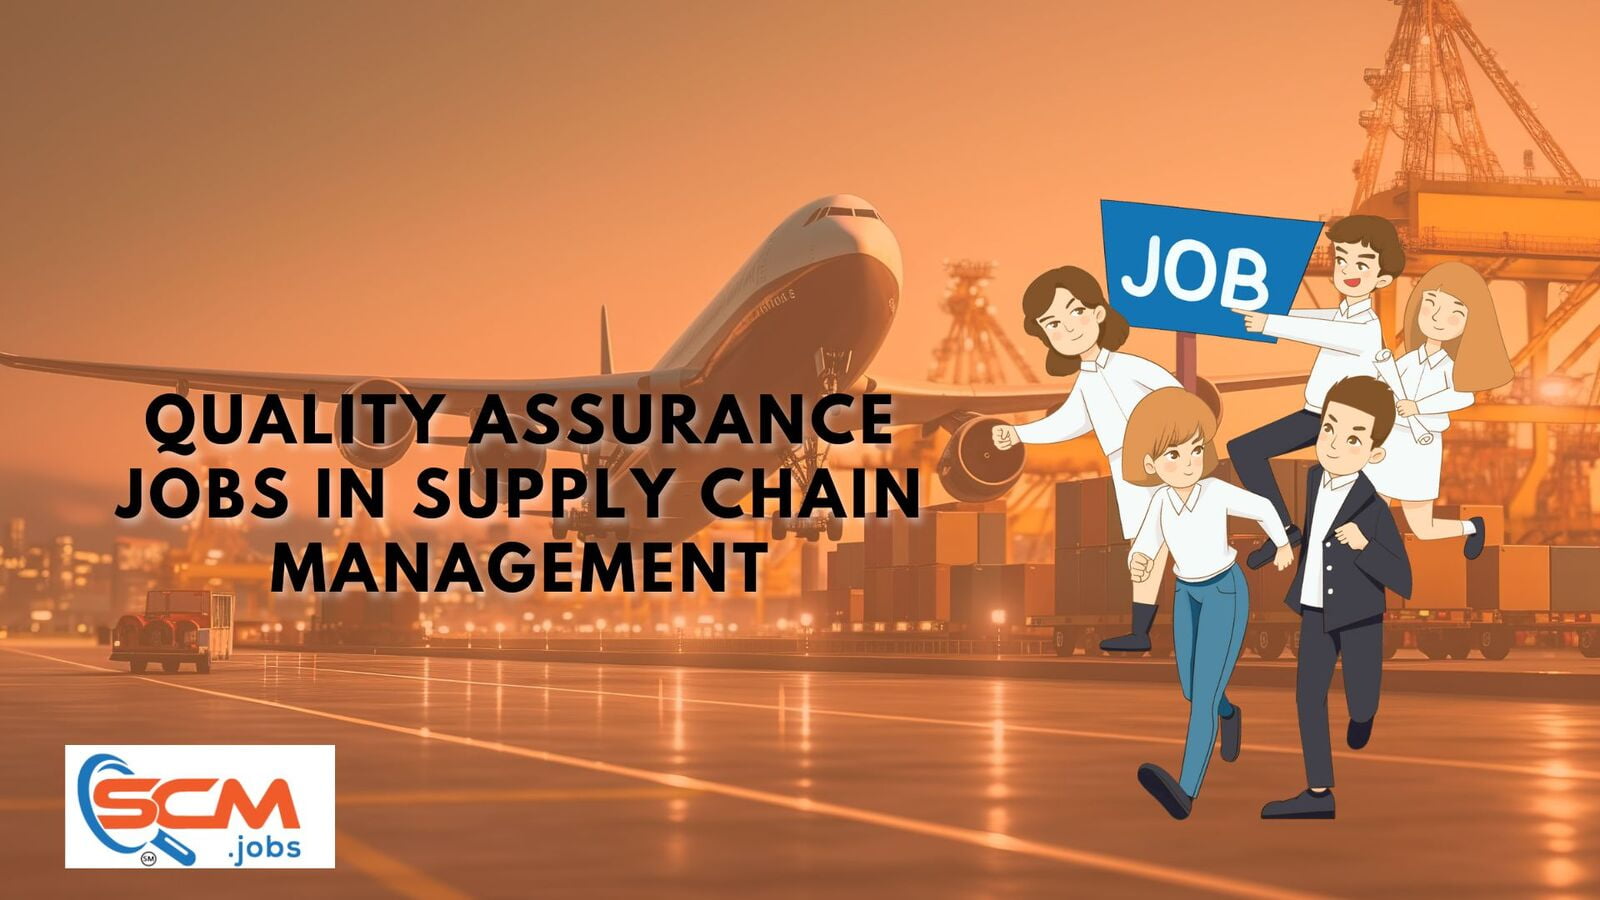 Exploring Quality Assurance Jobs in Supply Chain Management